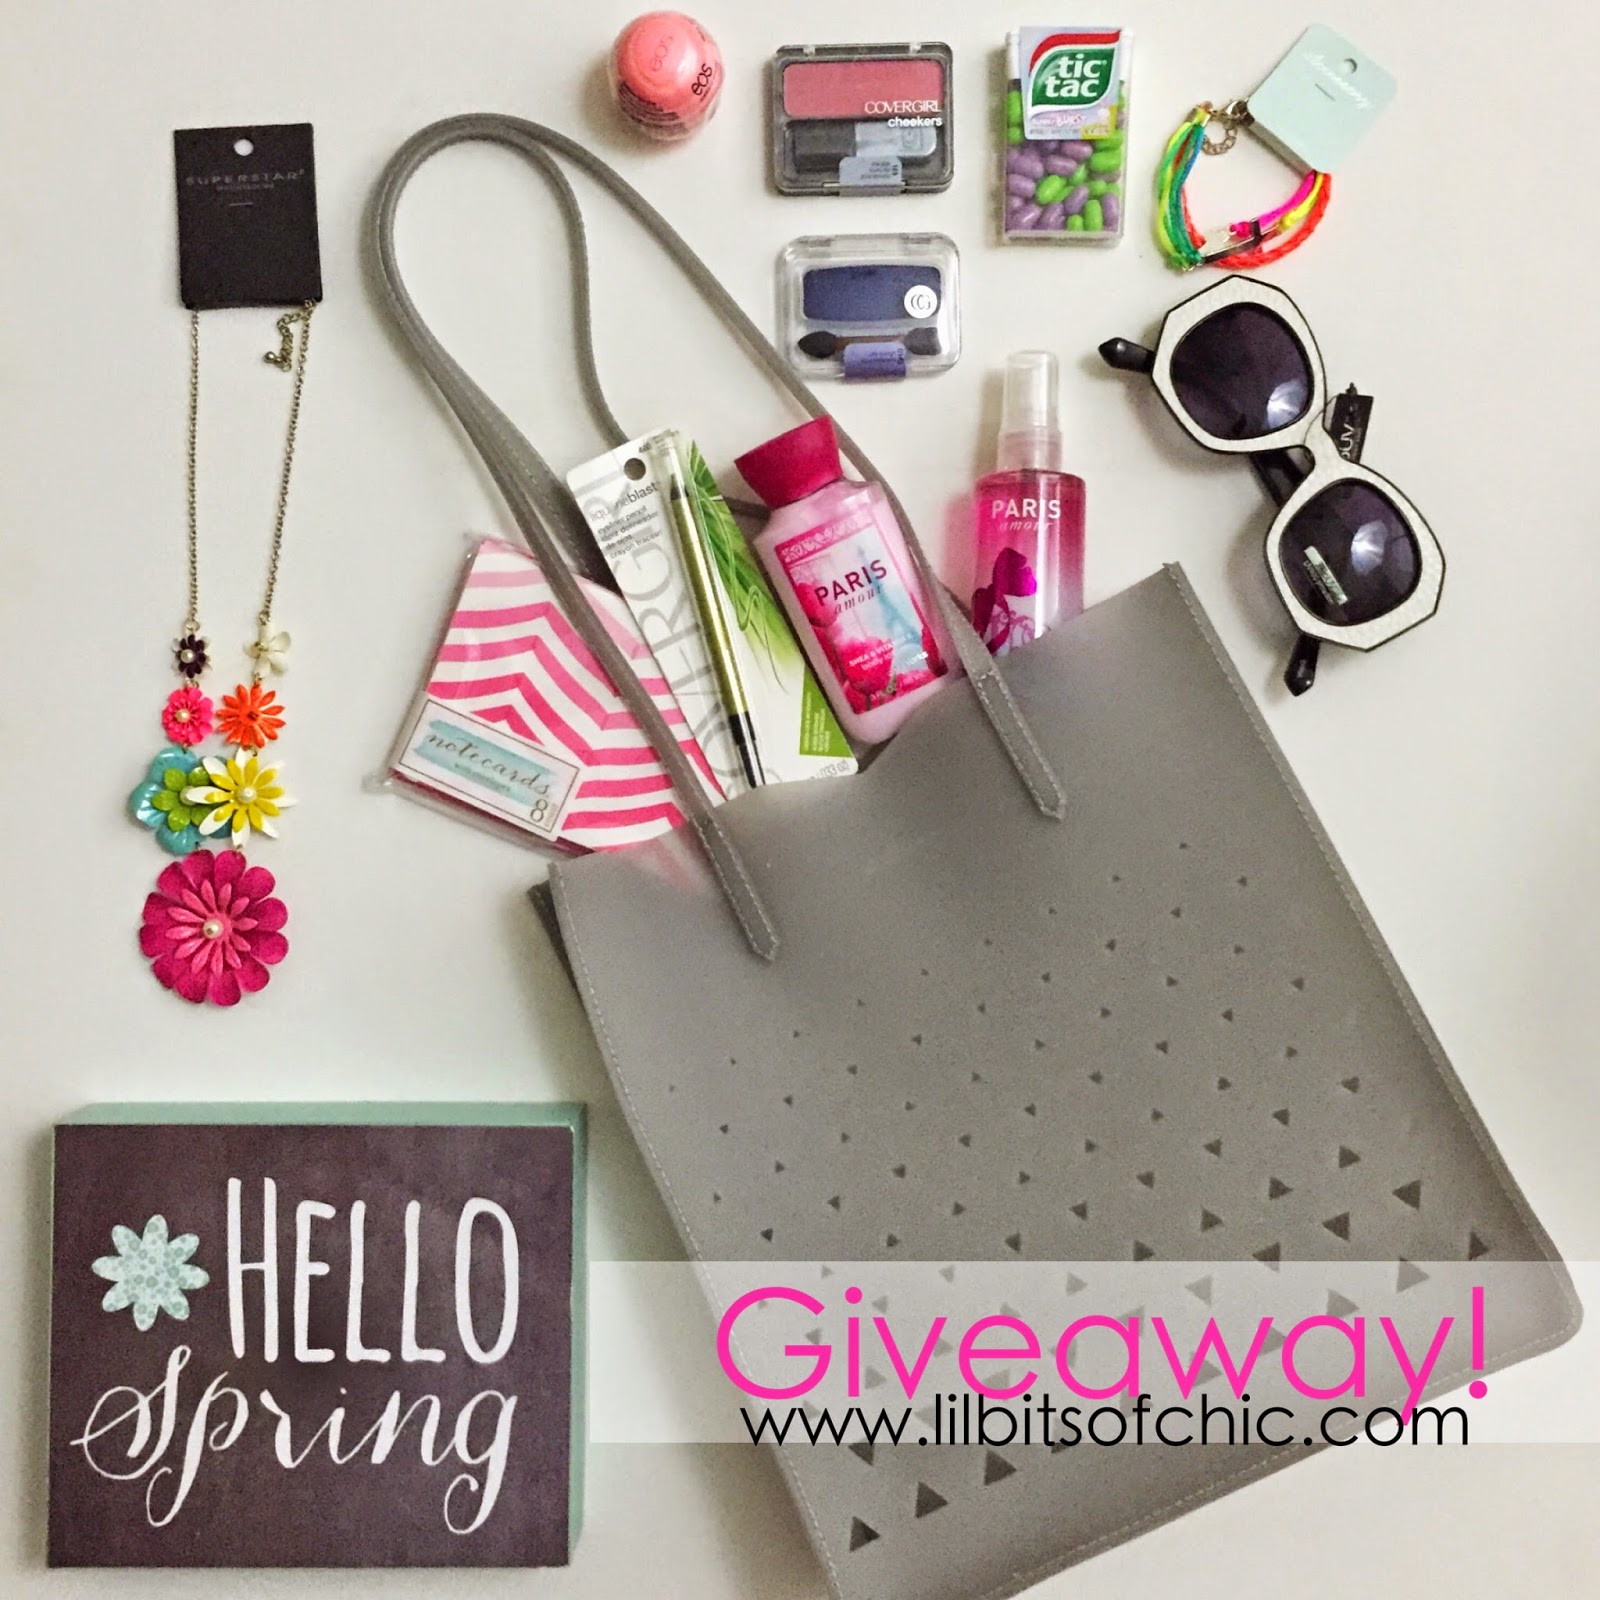 Hello Spring Giveaway!